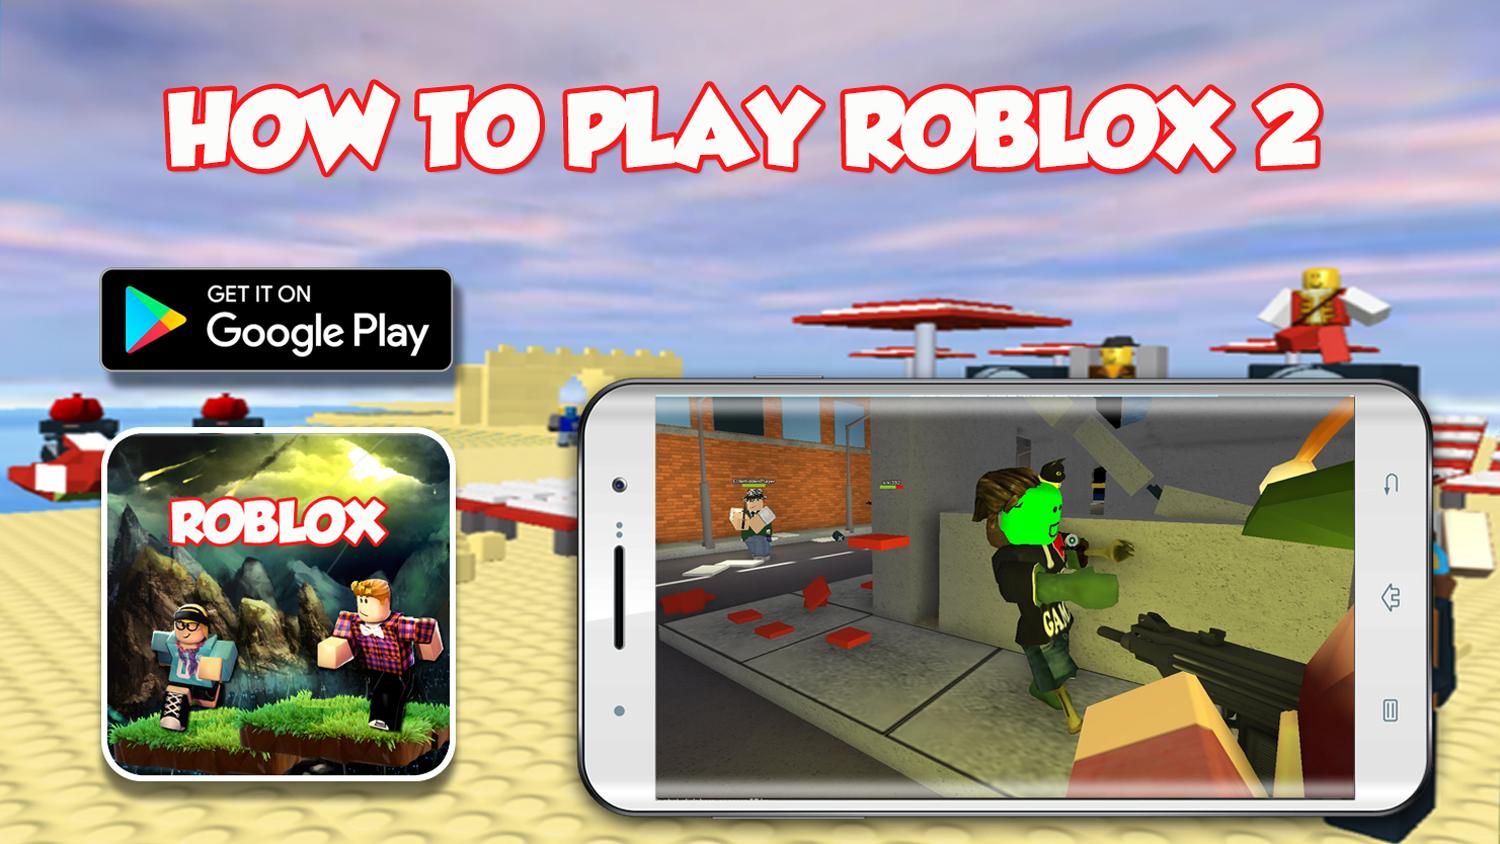 Guide For Roblox 2 Free For Android Apk Download - free to play roblox like game